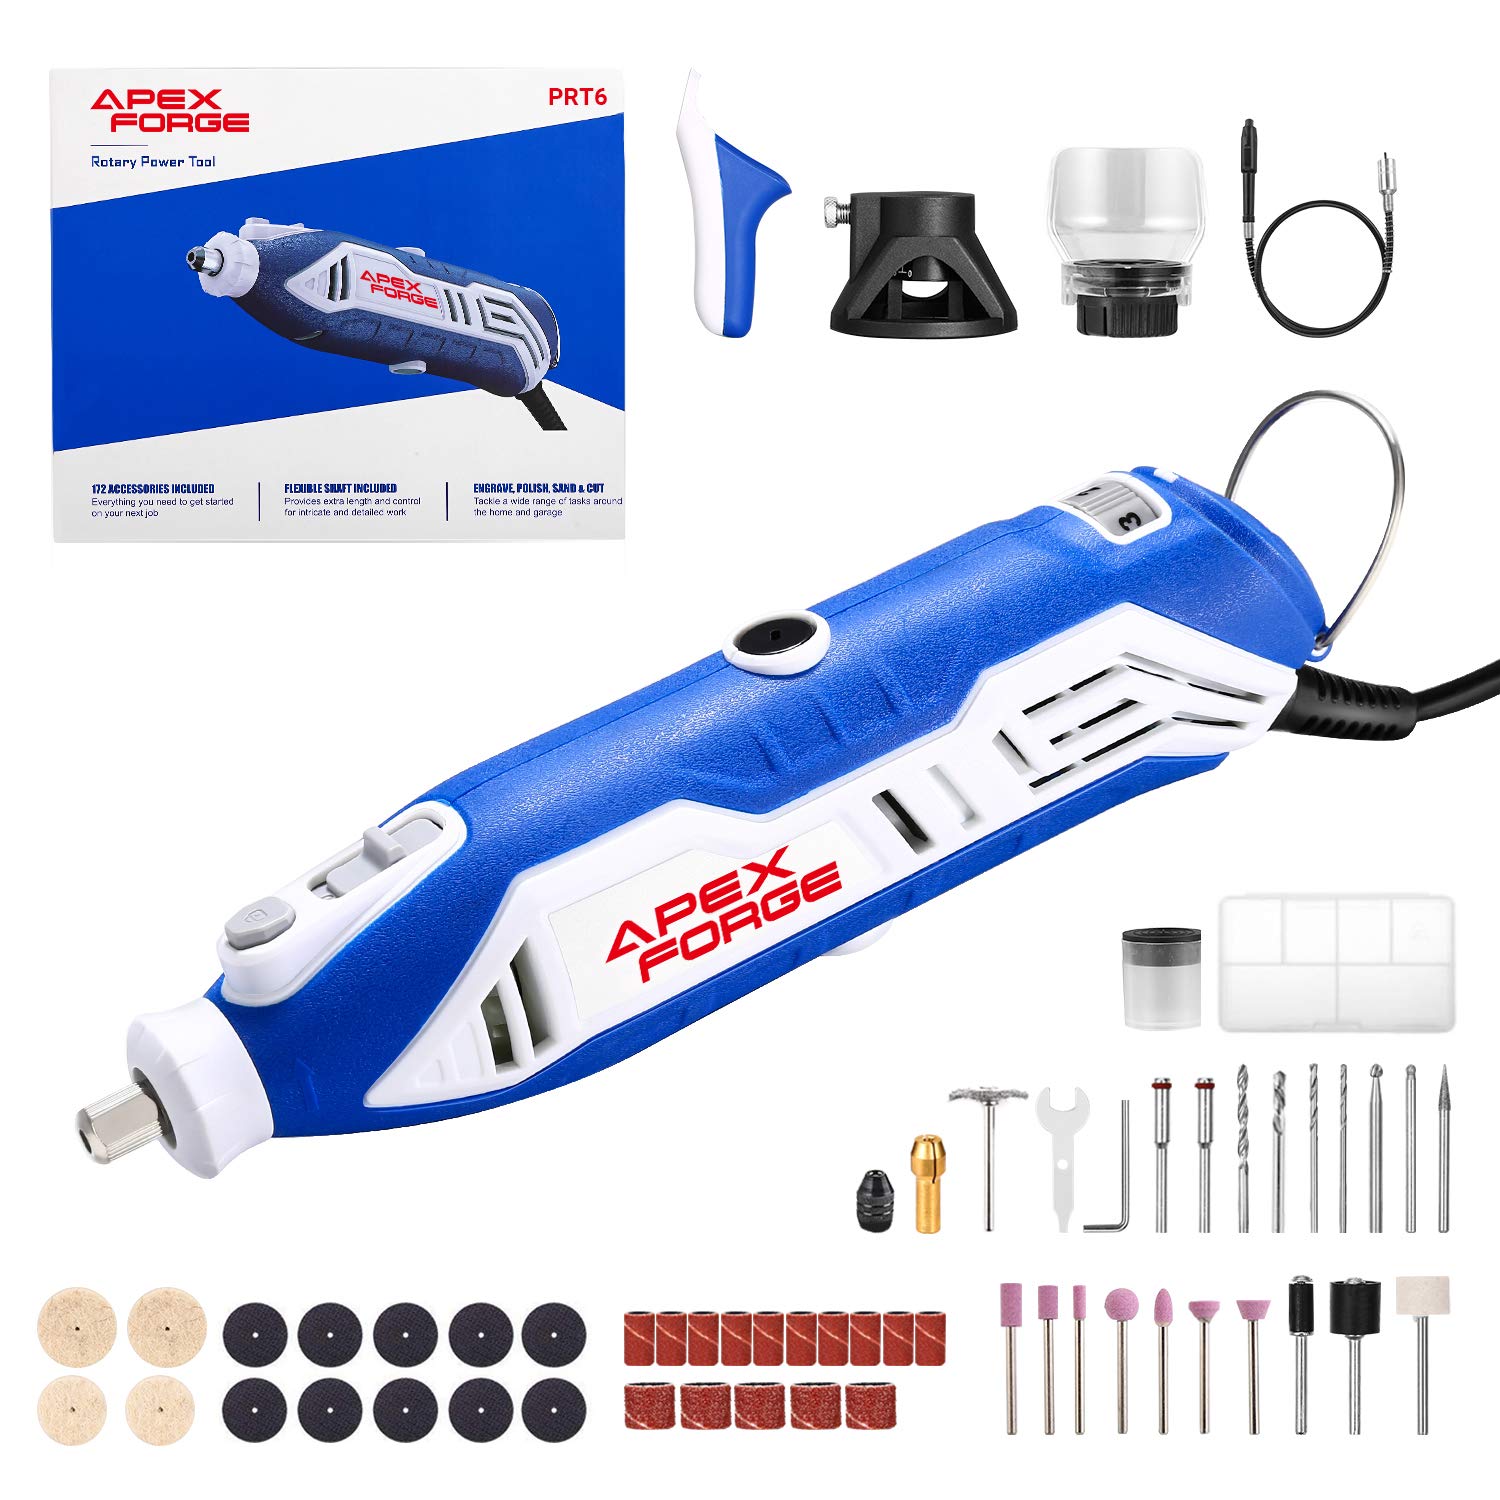 APEXFORGE M0 Rotary Tool Accessories Kit + M6 Rotary Tool Kit, Keyless Chuck & Flex Shaft, 357 + 172 Accessories, 6-Speed, 4 Attachments & Carrying Case, Ideal for Cutting/Sanding/Drilling/Sharpening